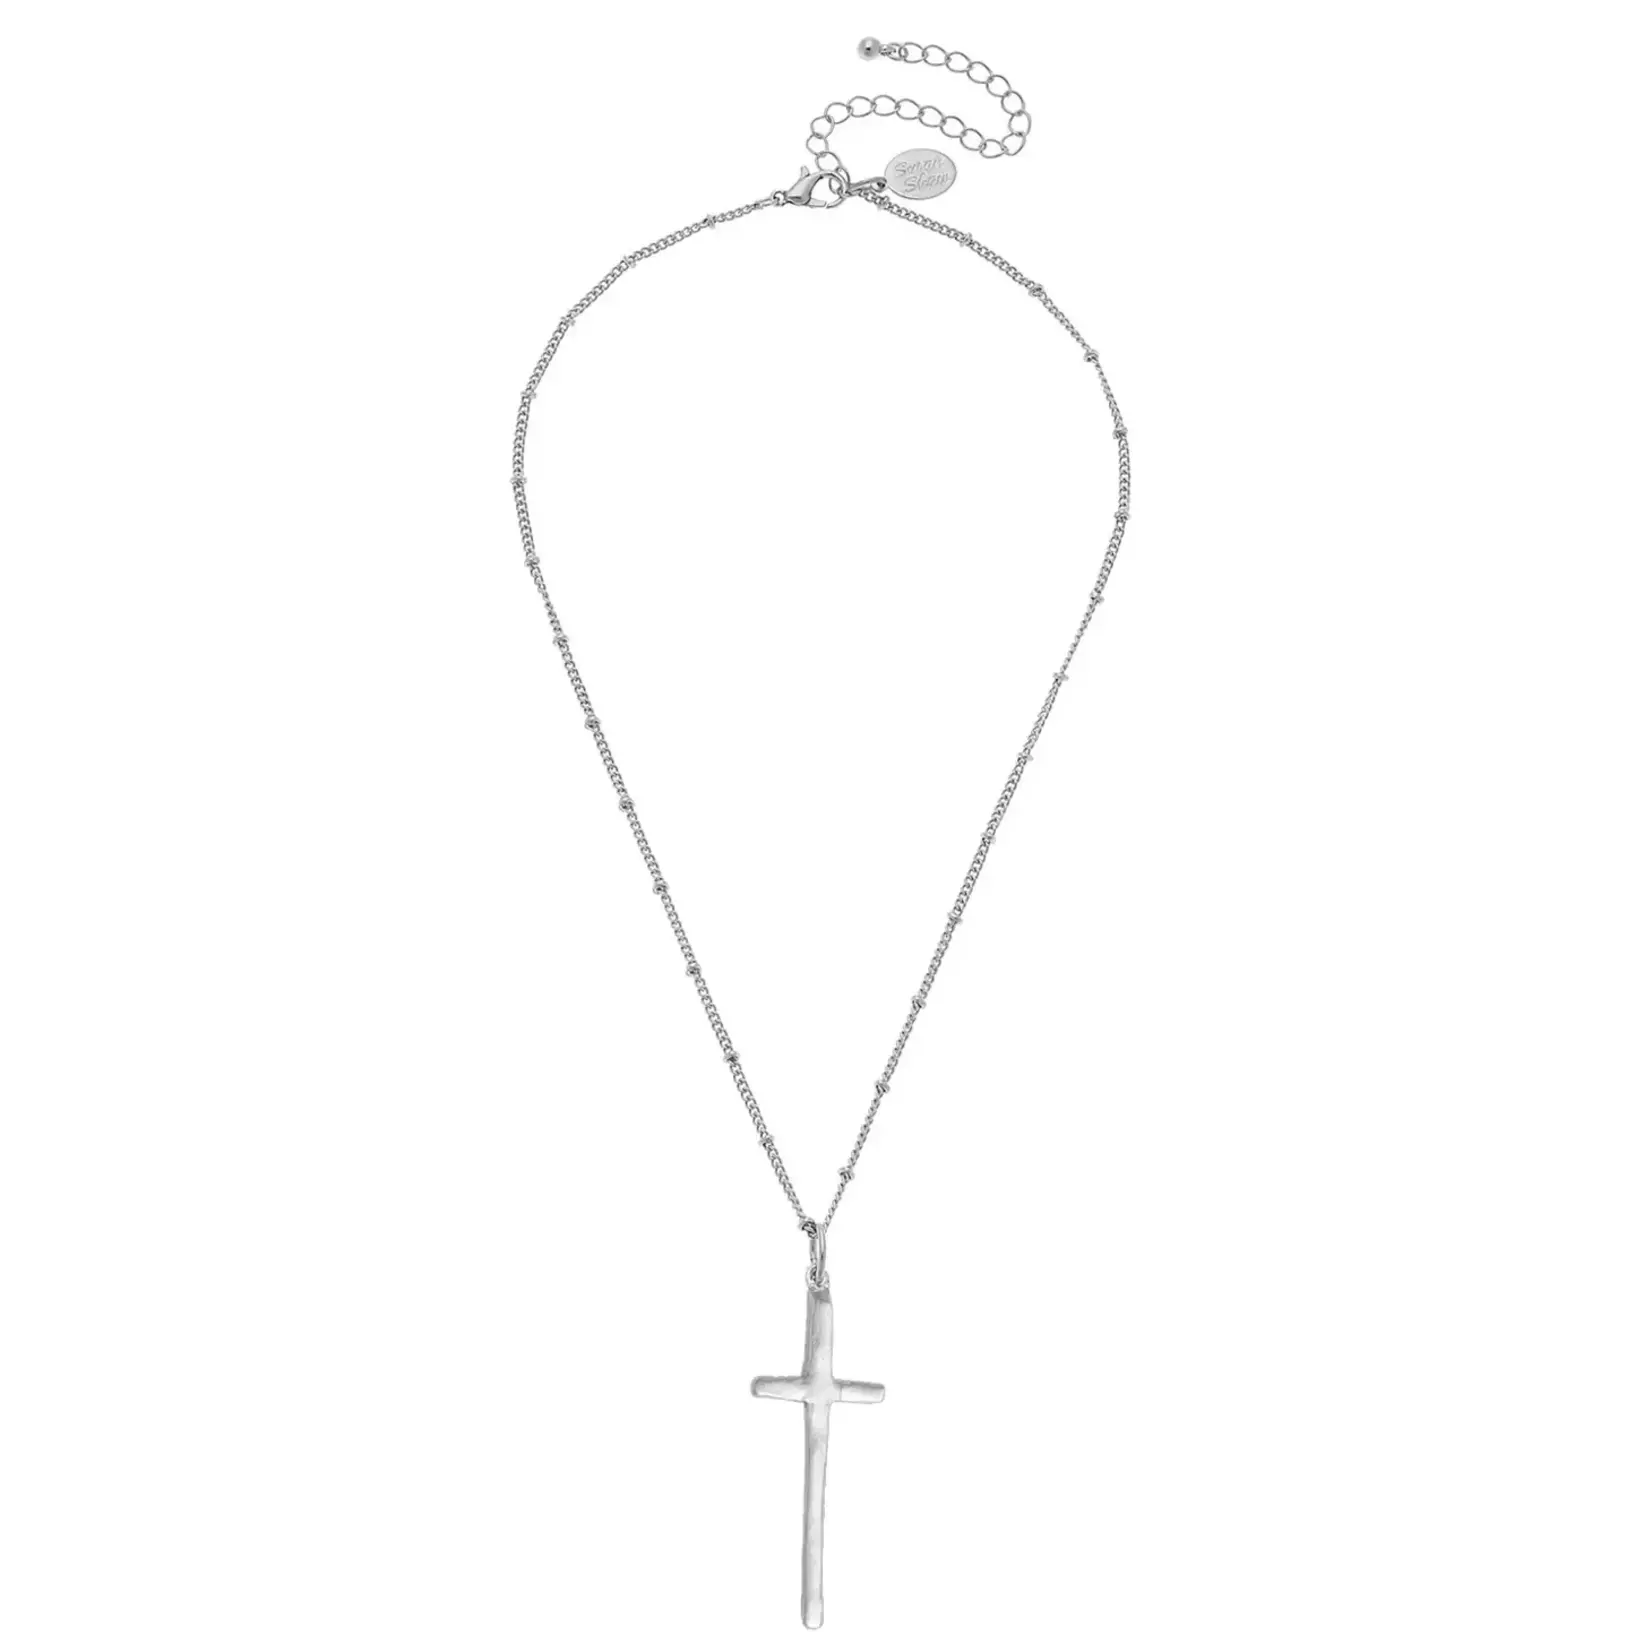 Susan Shaw Silver Dainty Elongated Cross Necklace